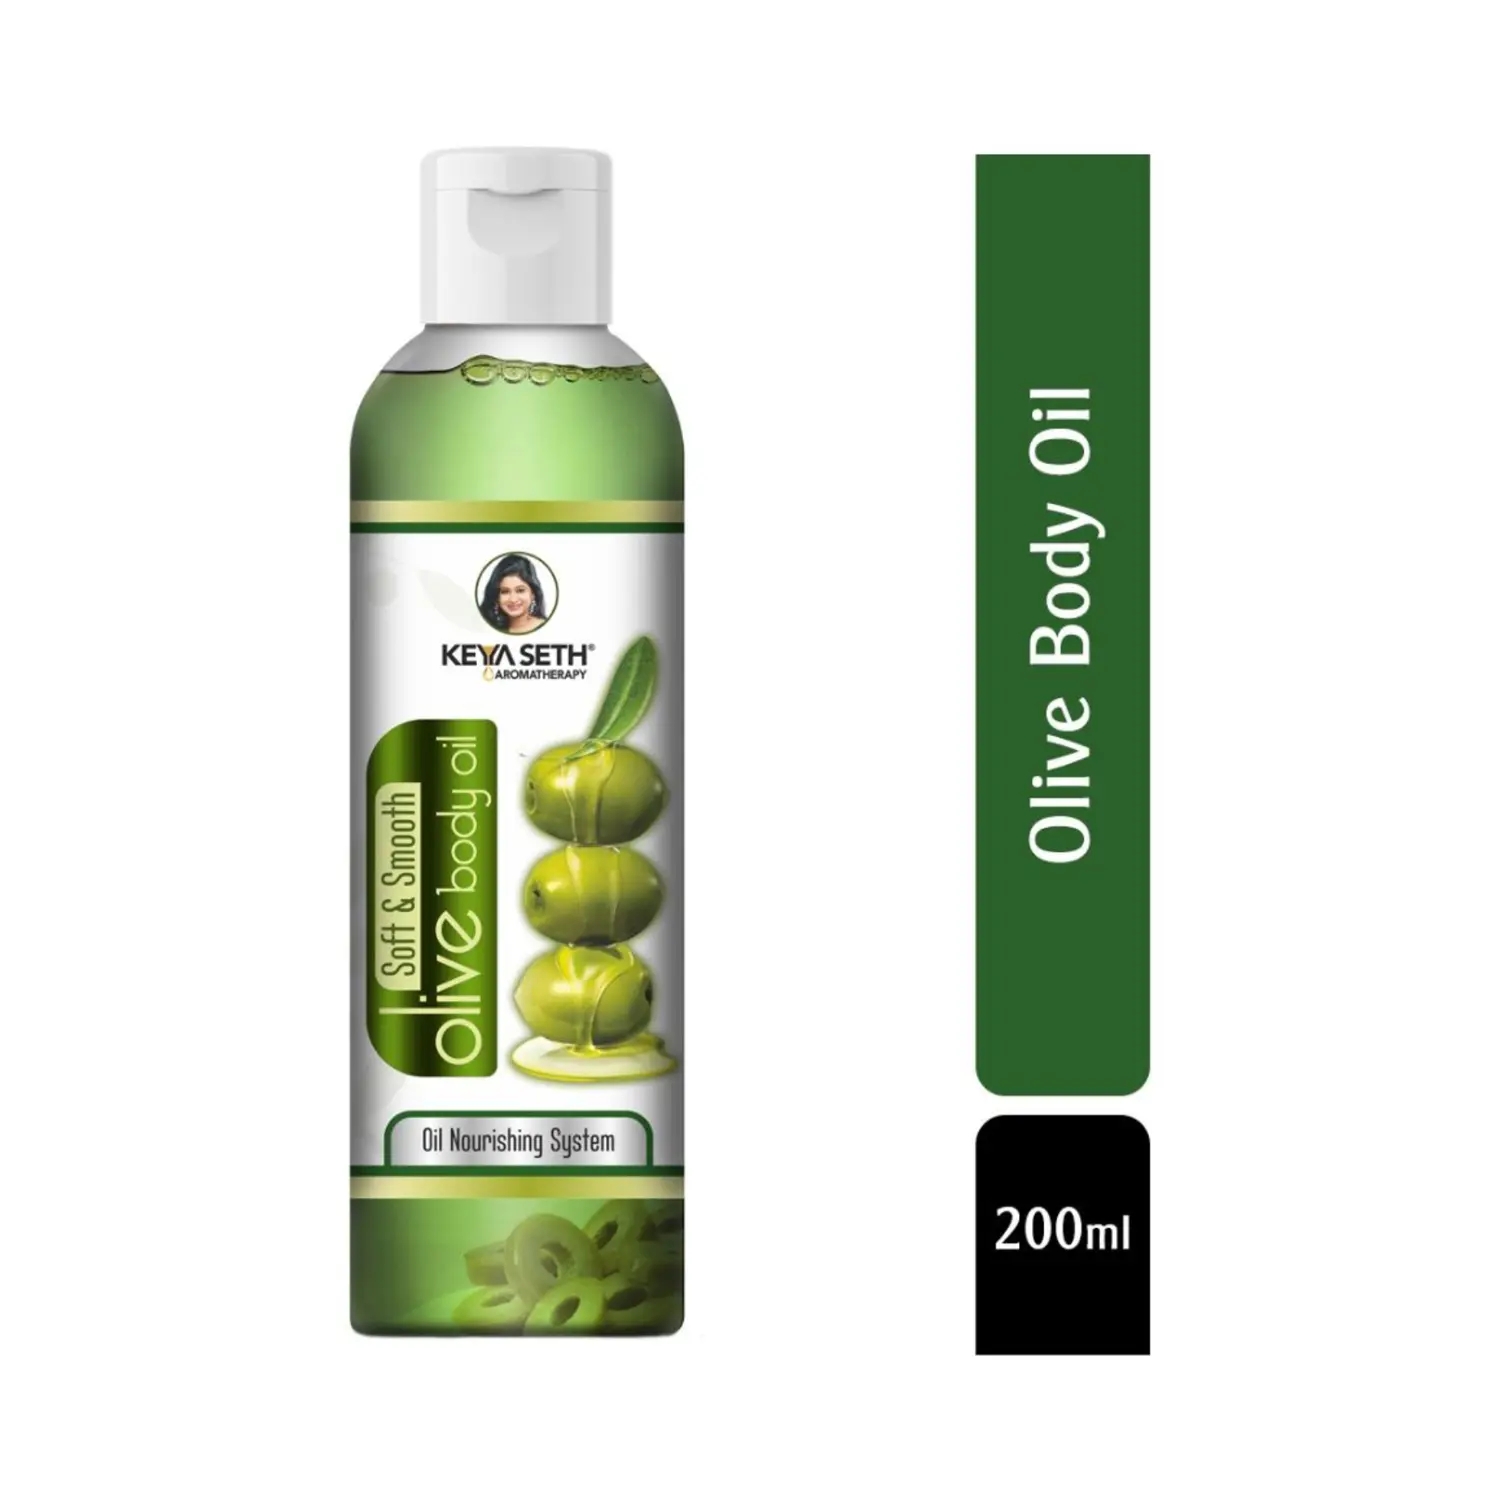 Keya Seth Aromatherapy | Keya Seth Aromatherapy Soft & Smooth Olive Body Oil (200ml)